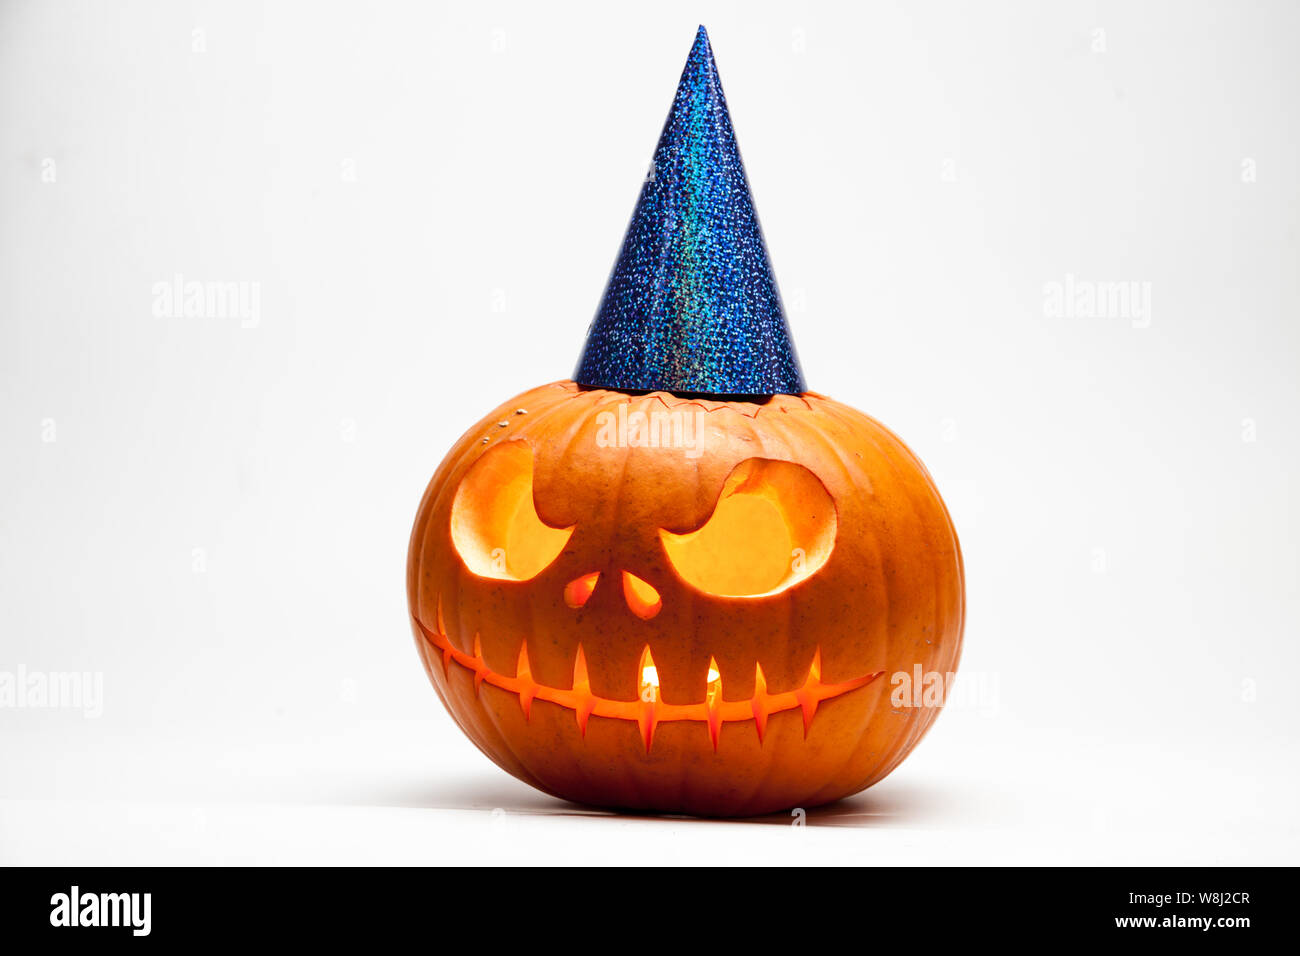 Halloween pumpkin head jack lantern with burning candles with festive hubcap isolated on white background Stock Photo